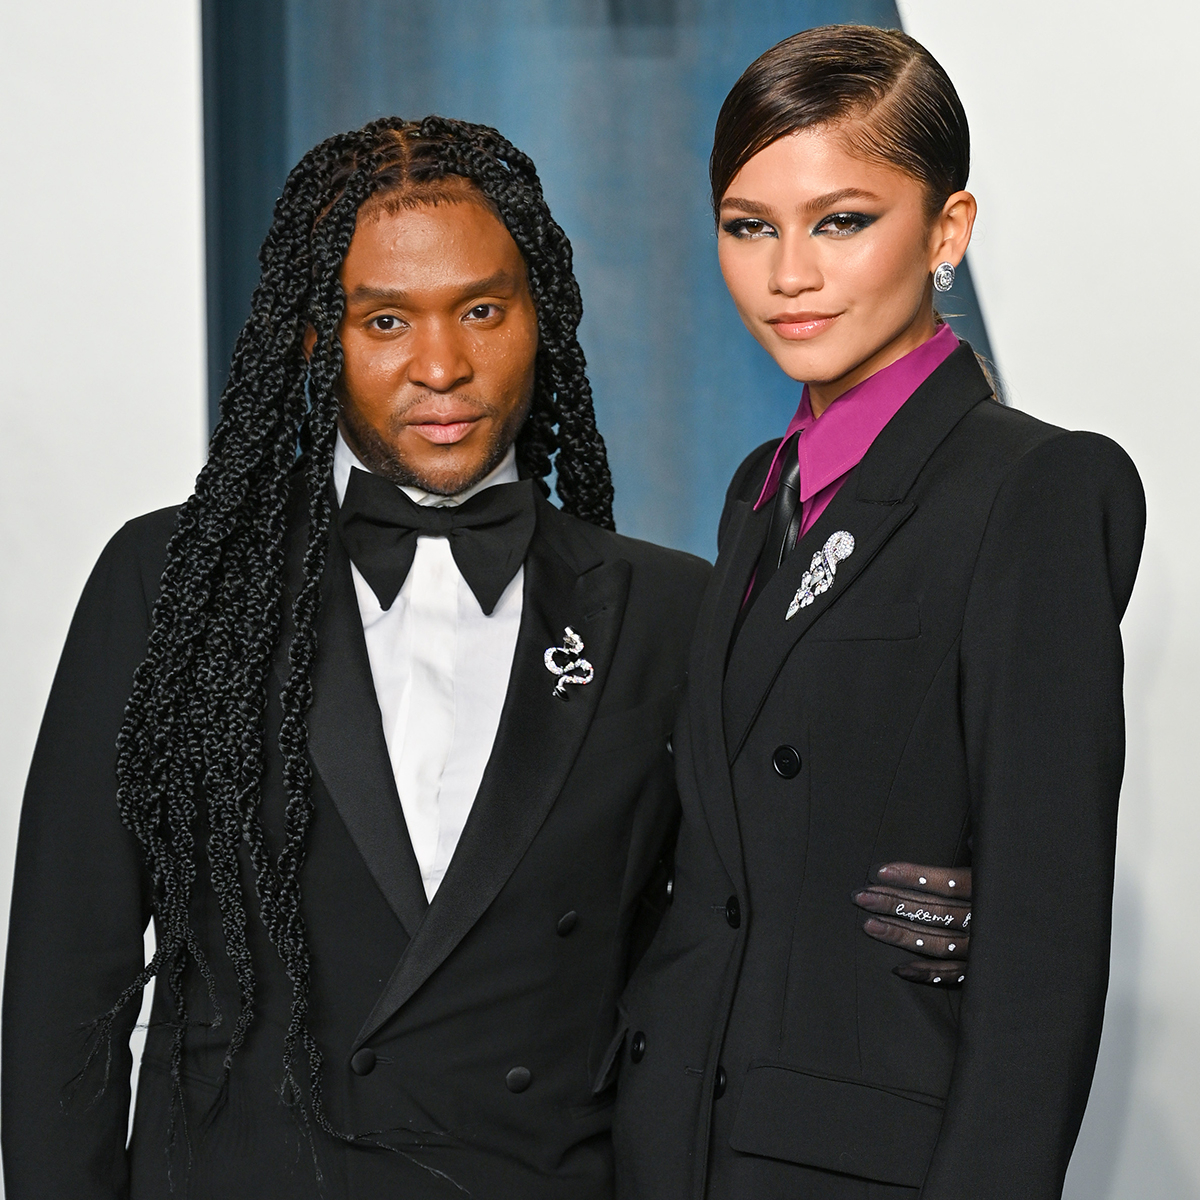 Zendaya on 'Challengers', Fashion With Law Roach, Music, and Fame